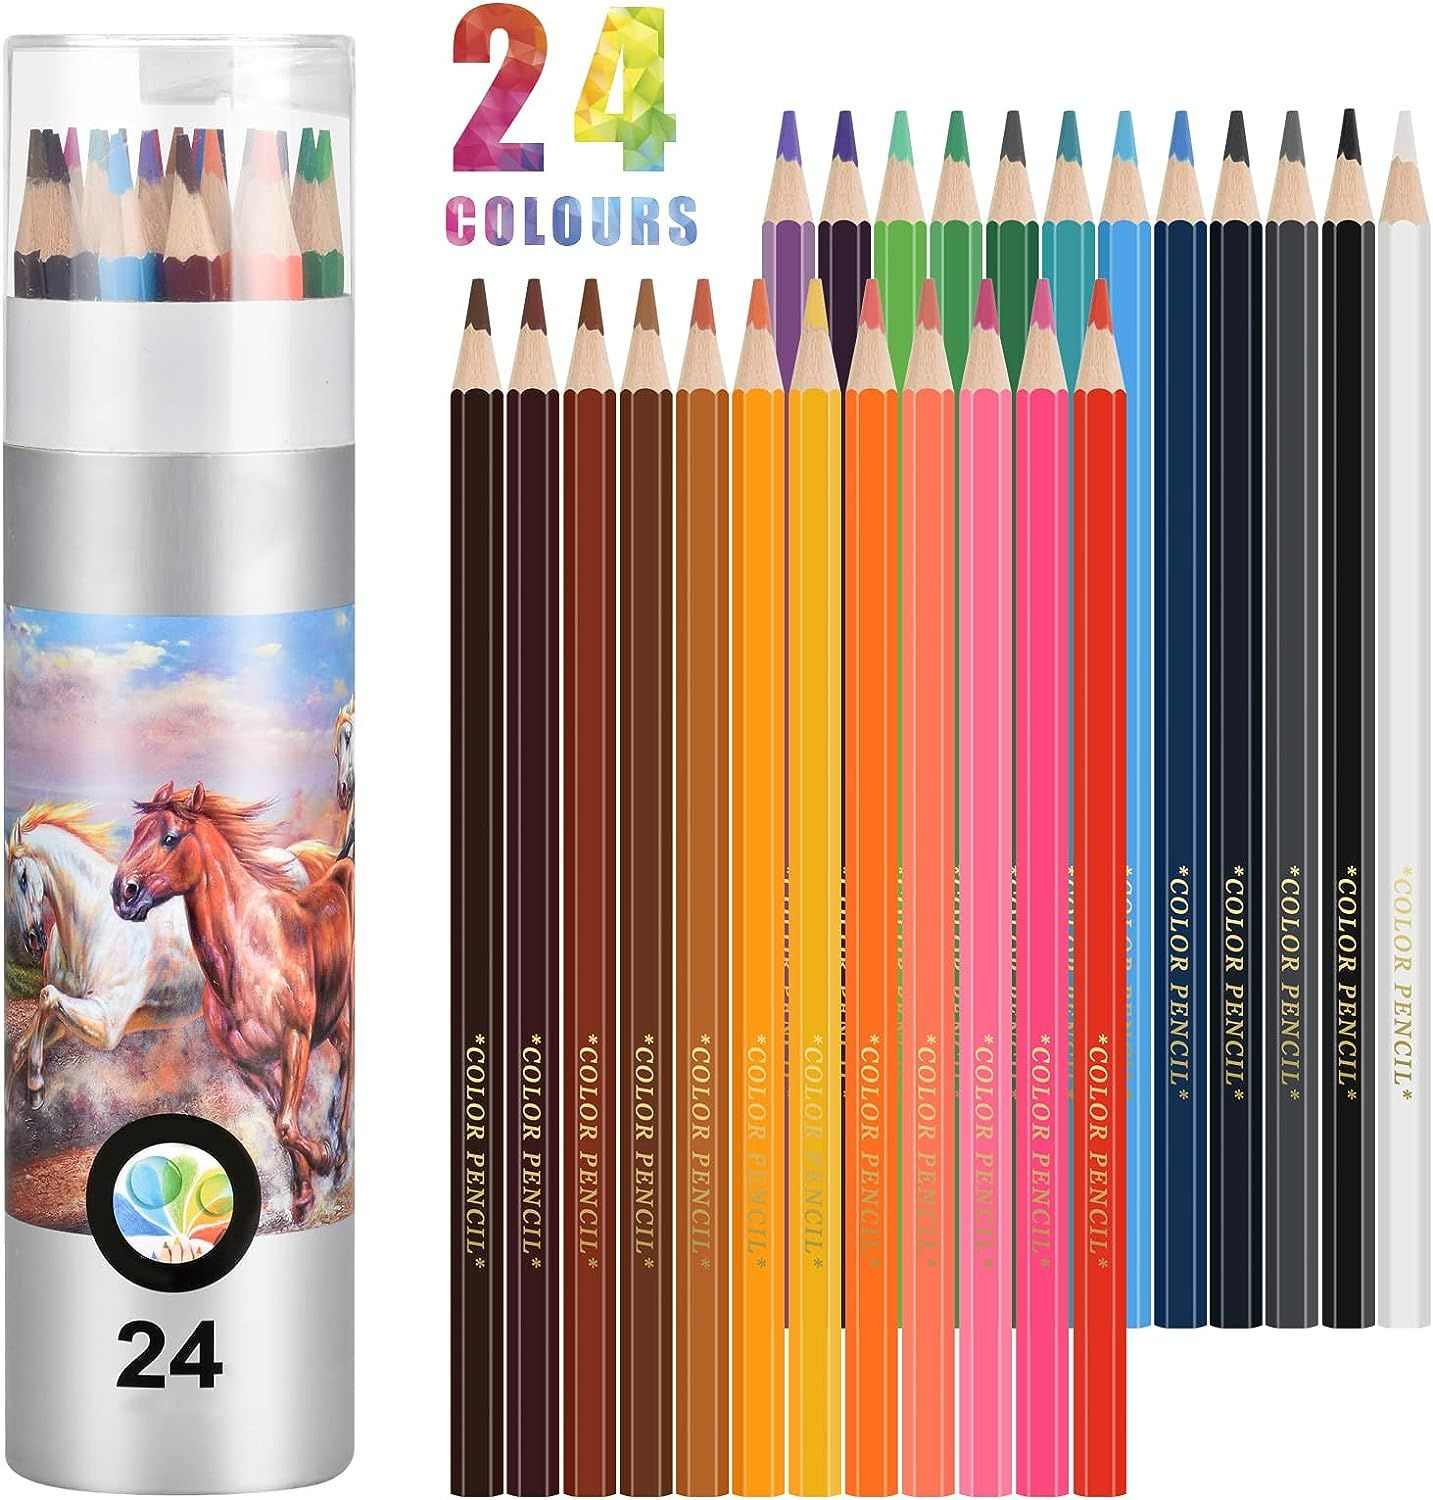 EooUooIP Colored Pencils, 24 Pcs Professional Coloured Pencils Blue,Green,Red 